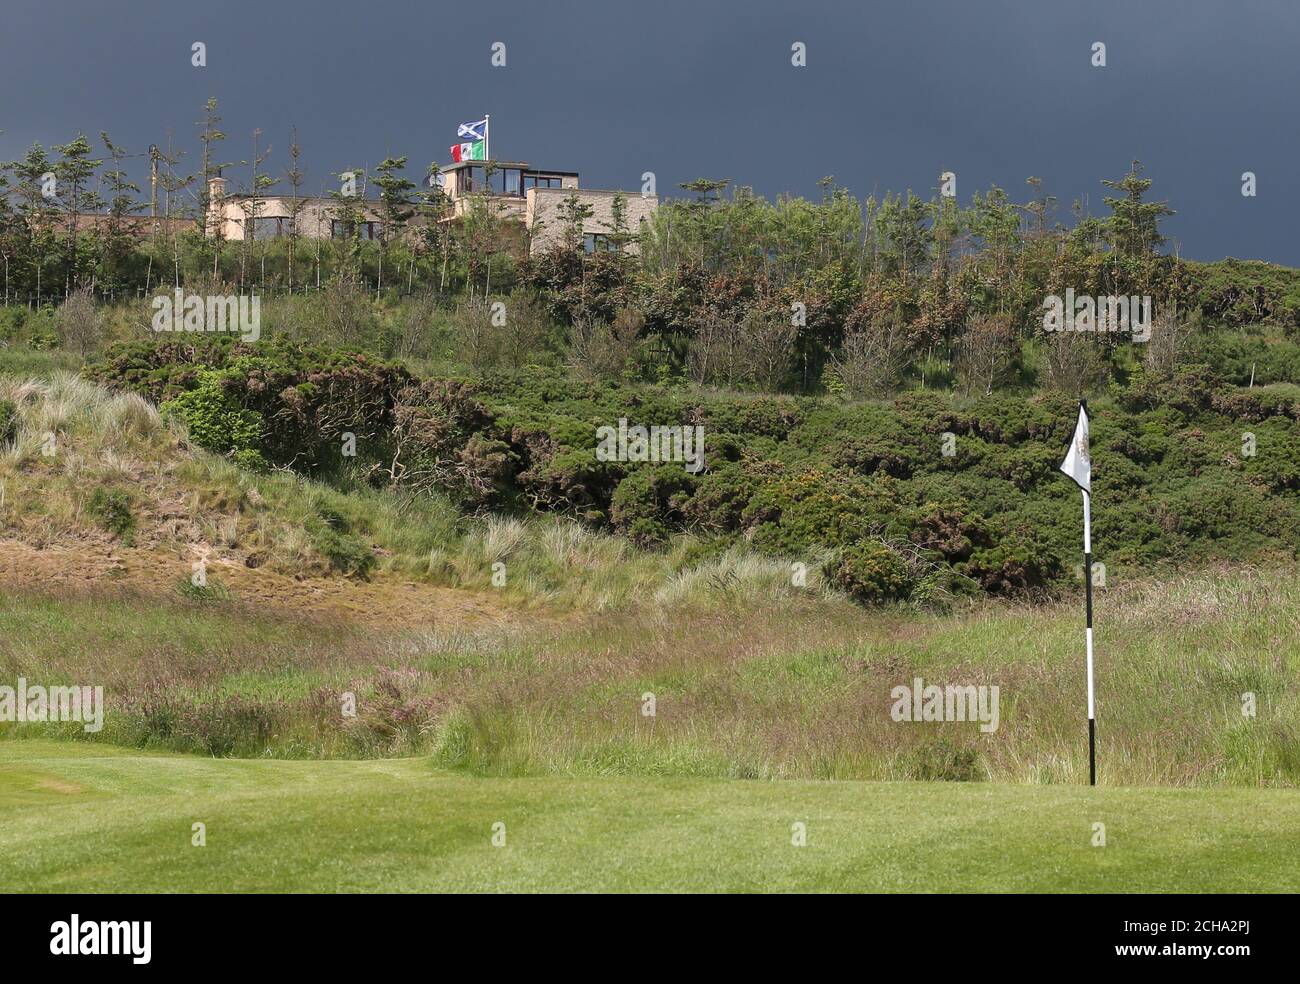 A Mexican flag flutters in the wind from a house bordering Trump International Golf Links at Balmeddie Stock Photo